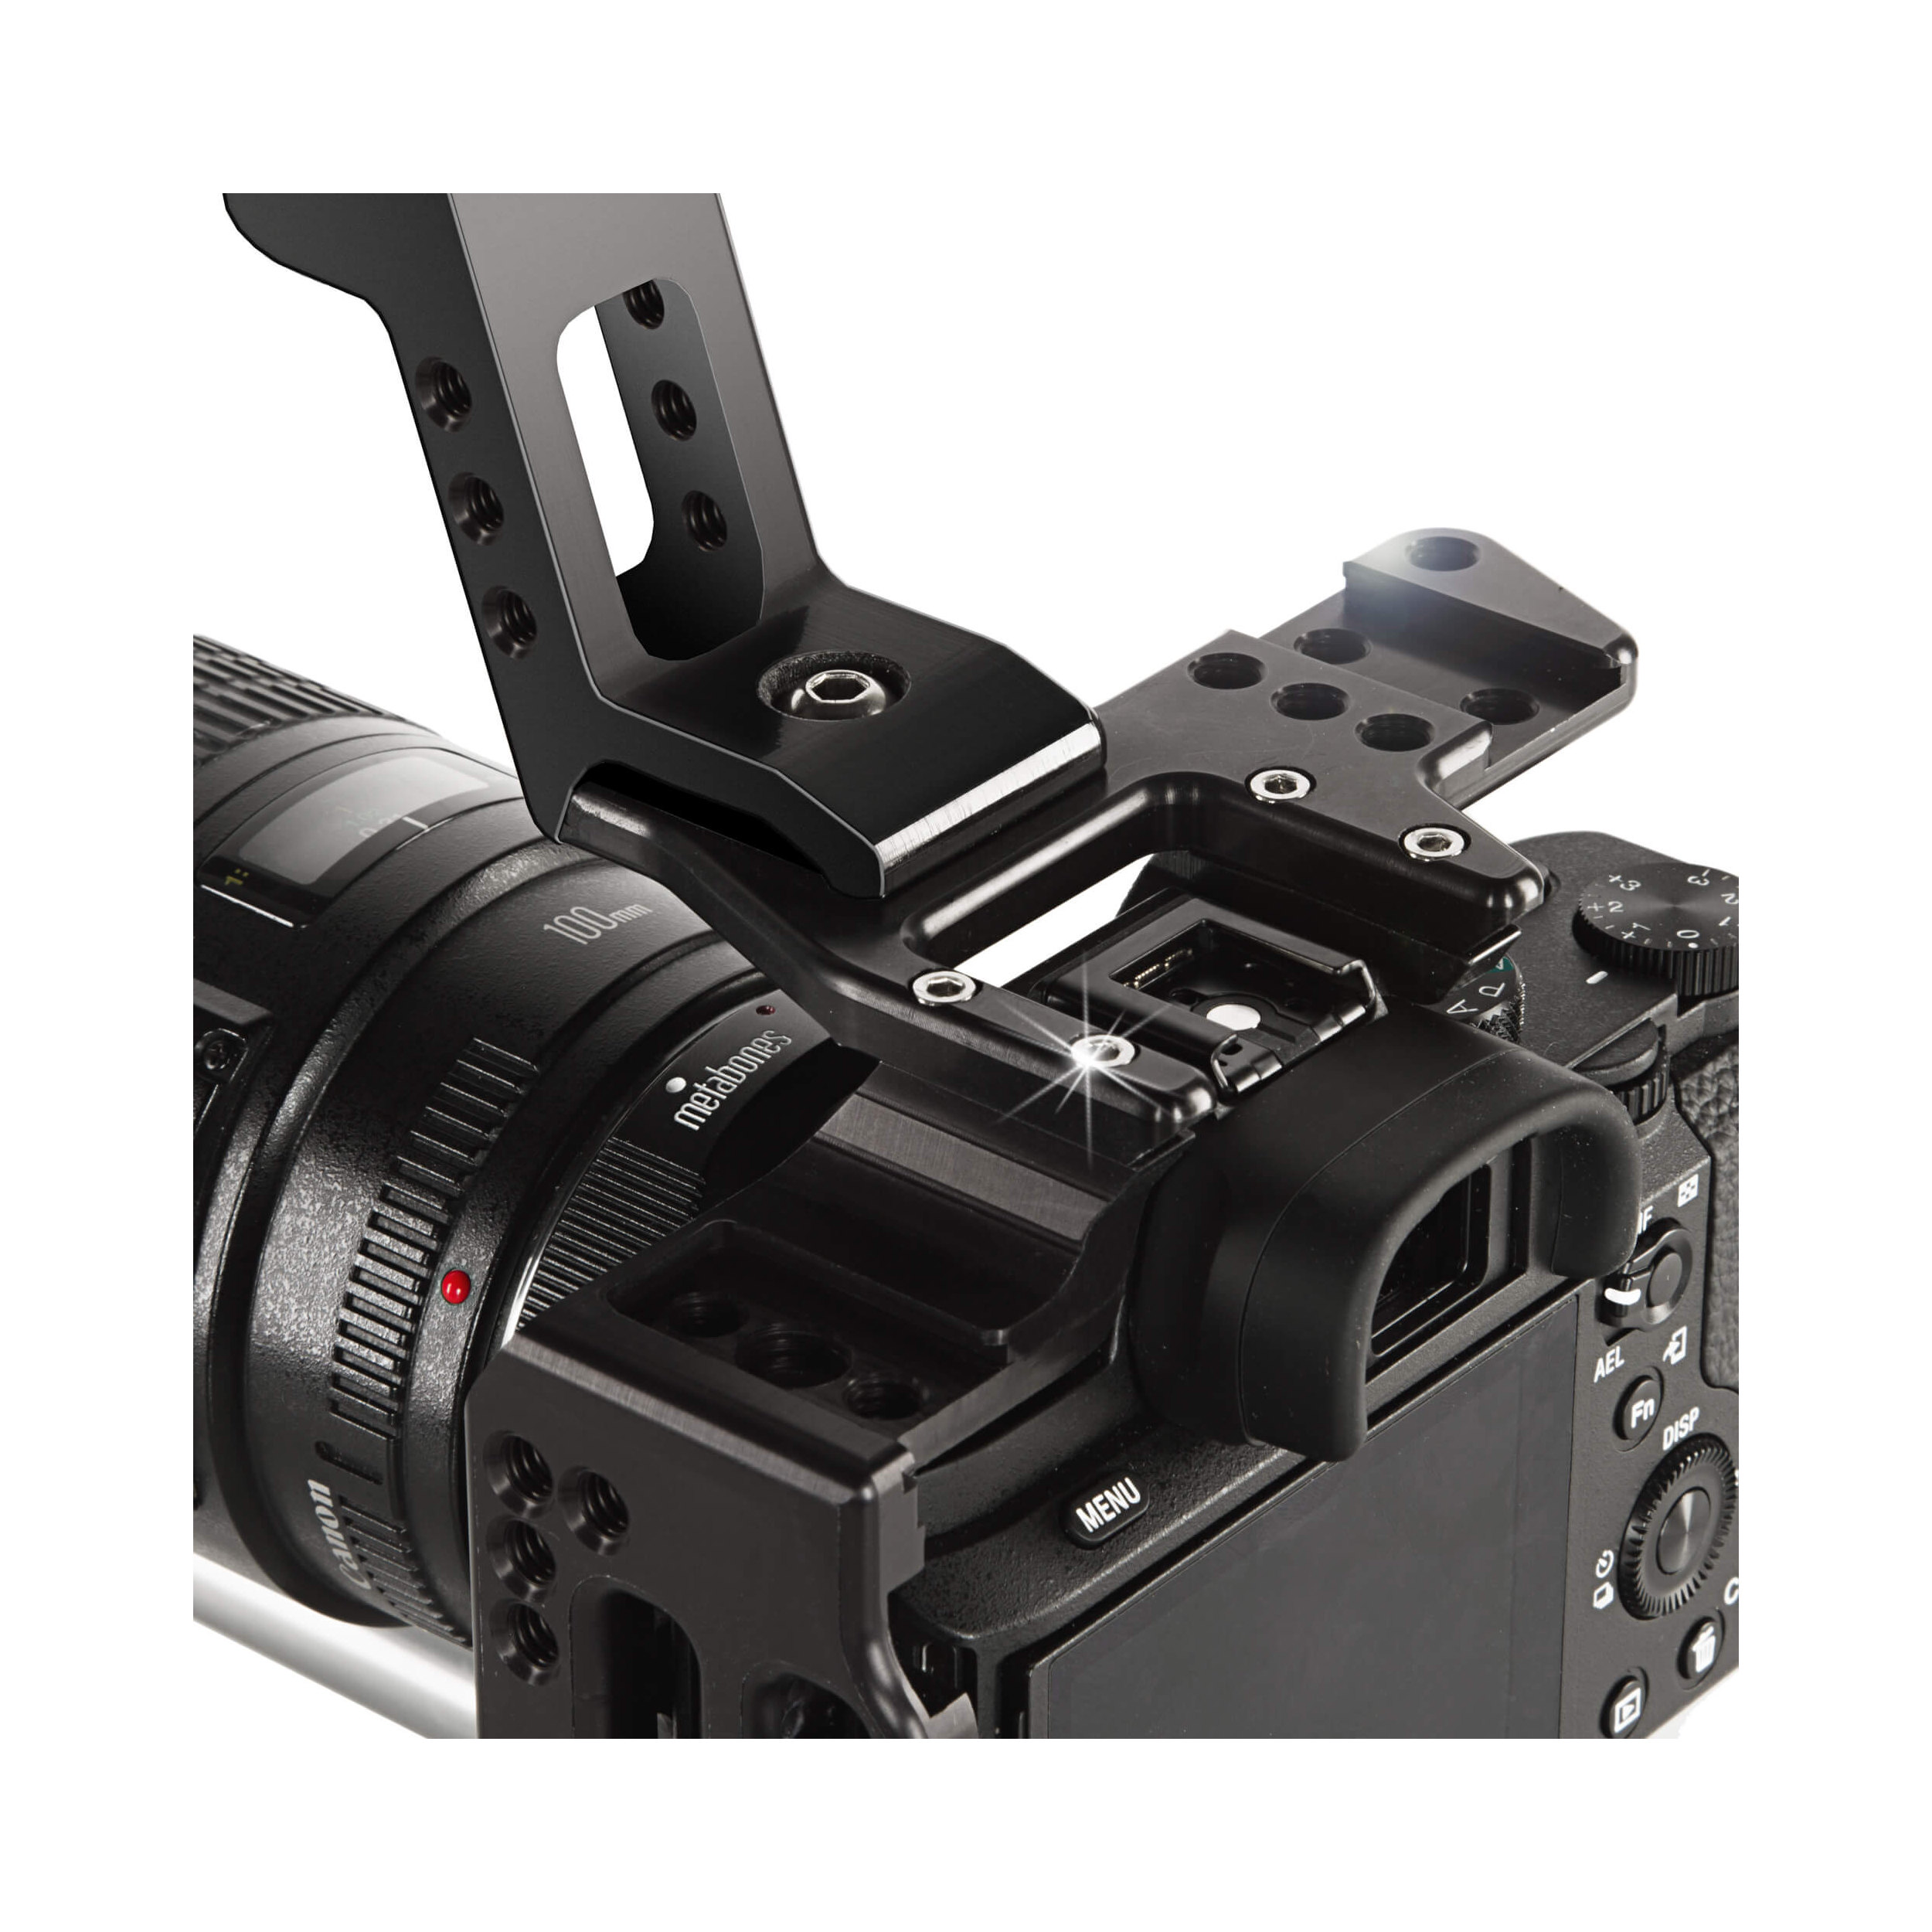 SHAPE Cage with Shoulder Mount System for Sony a7 II, a7S II, & a7R II